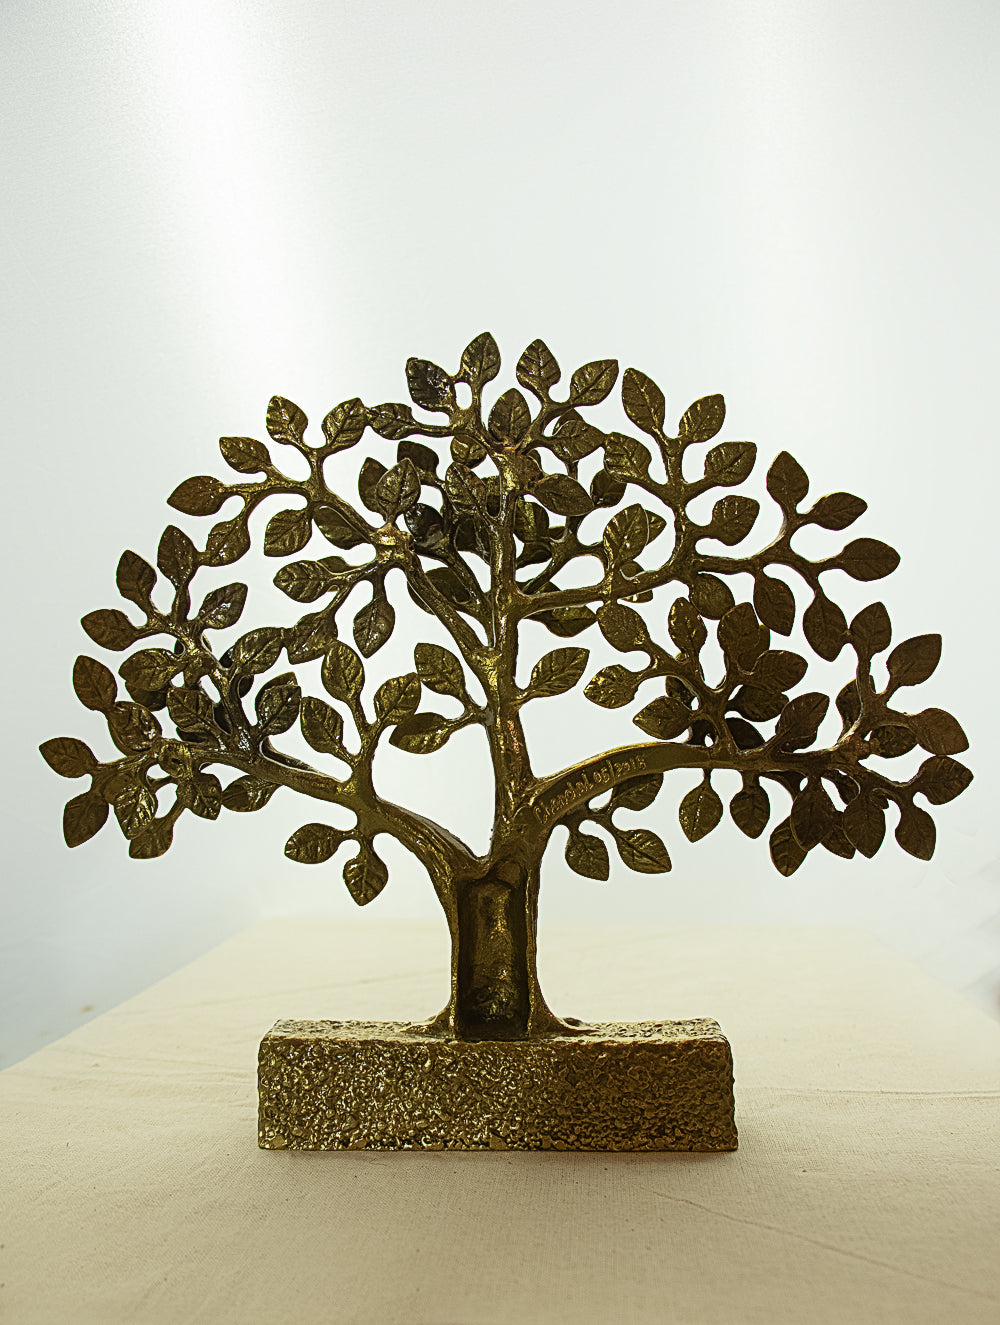 Load image into Gallery viewer, Brass Curio - Mahabodhi Tree - The India Craft House 